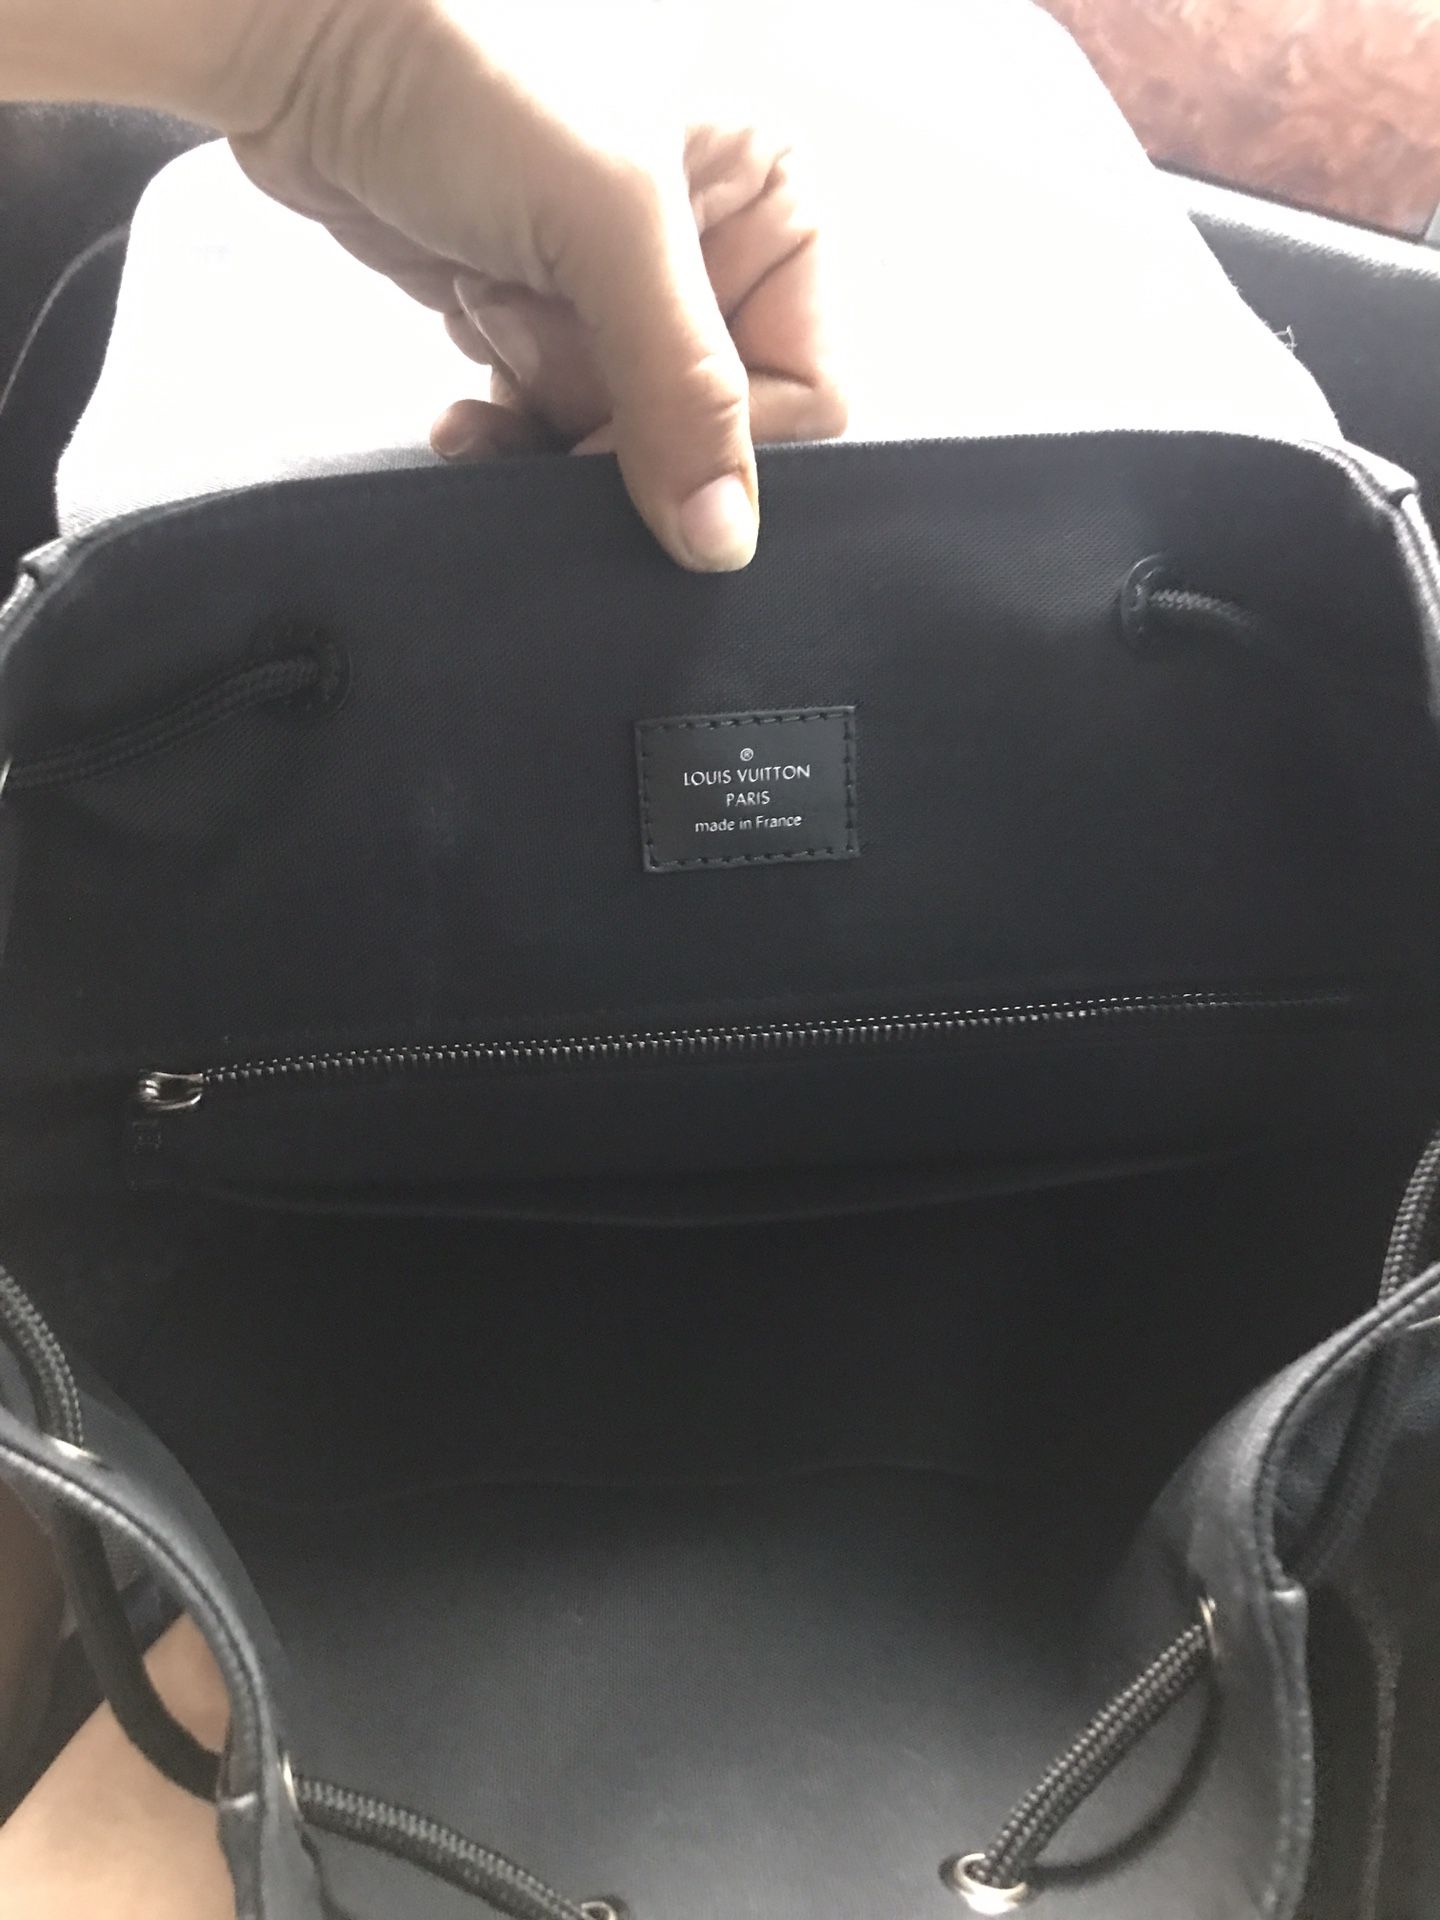 LV x Supreme Christopher pm Backpack for Sale in Sarahsville, OH - OfferUp